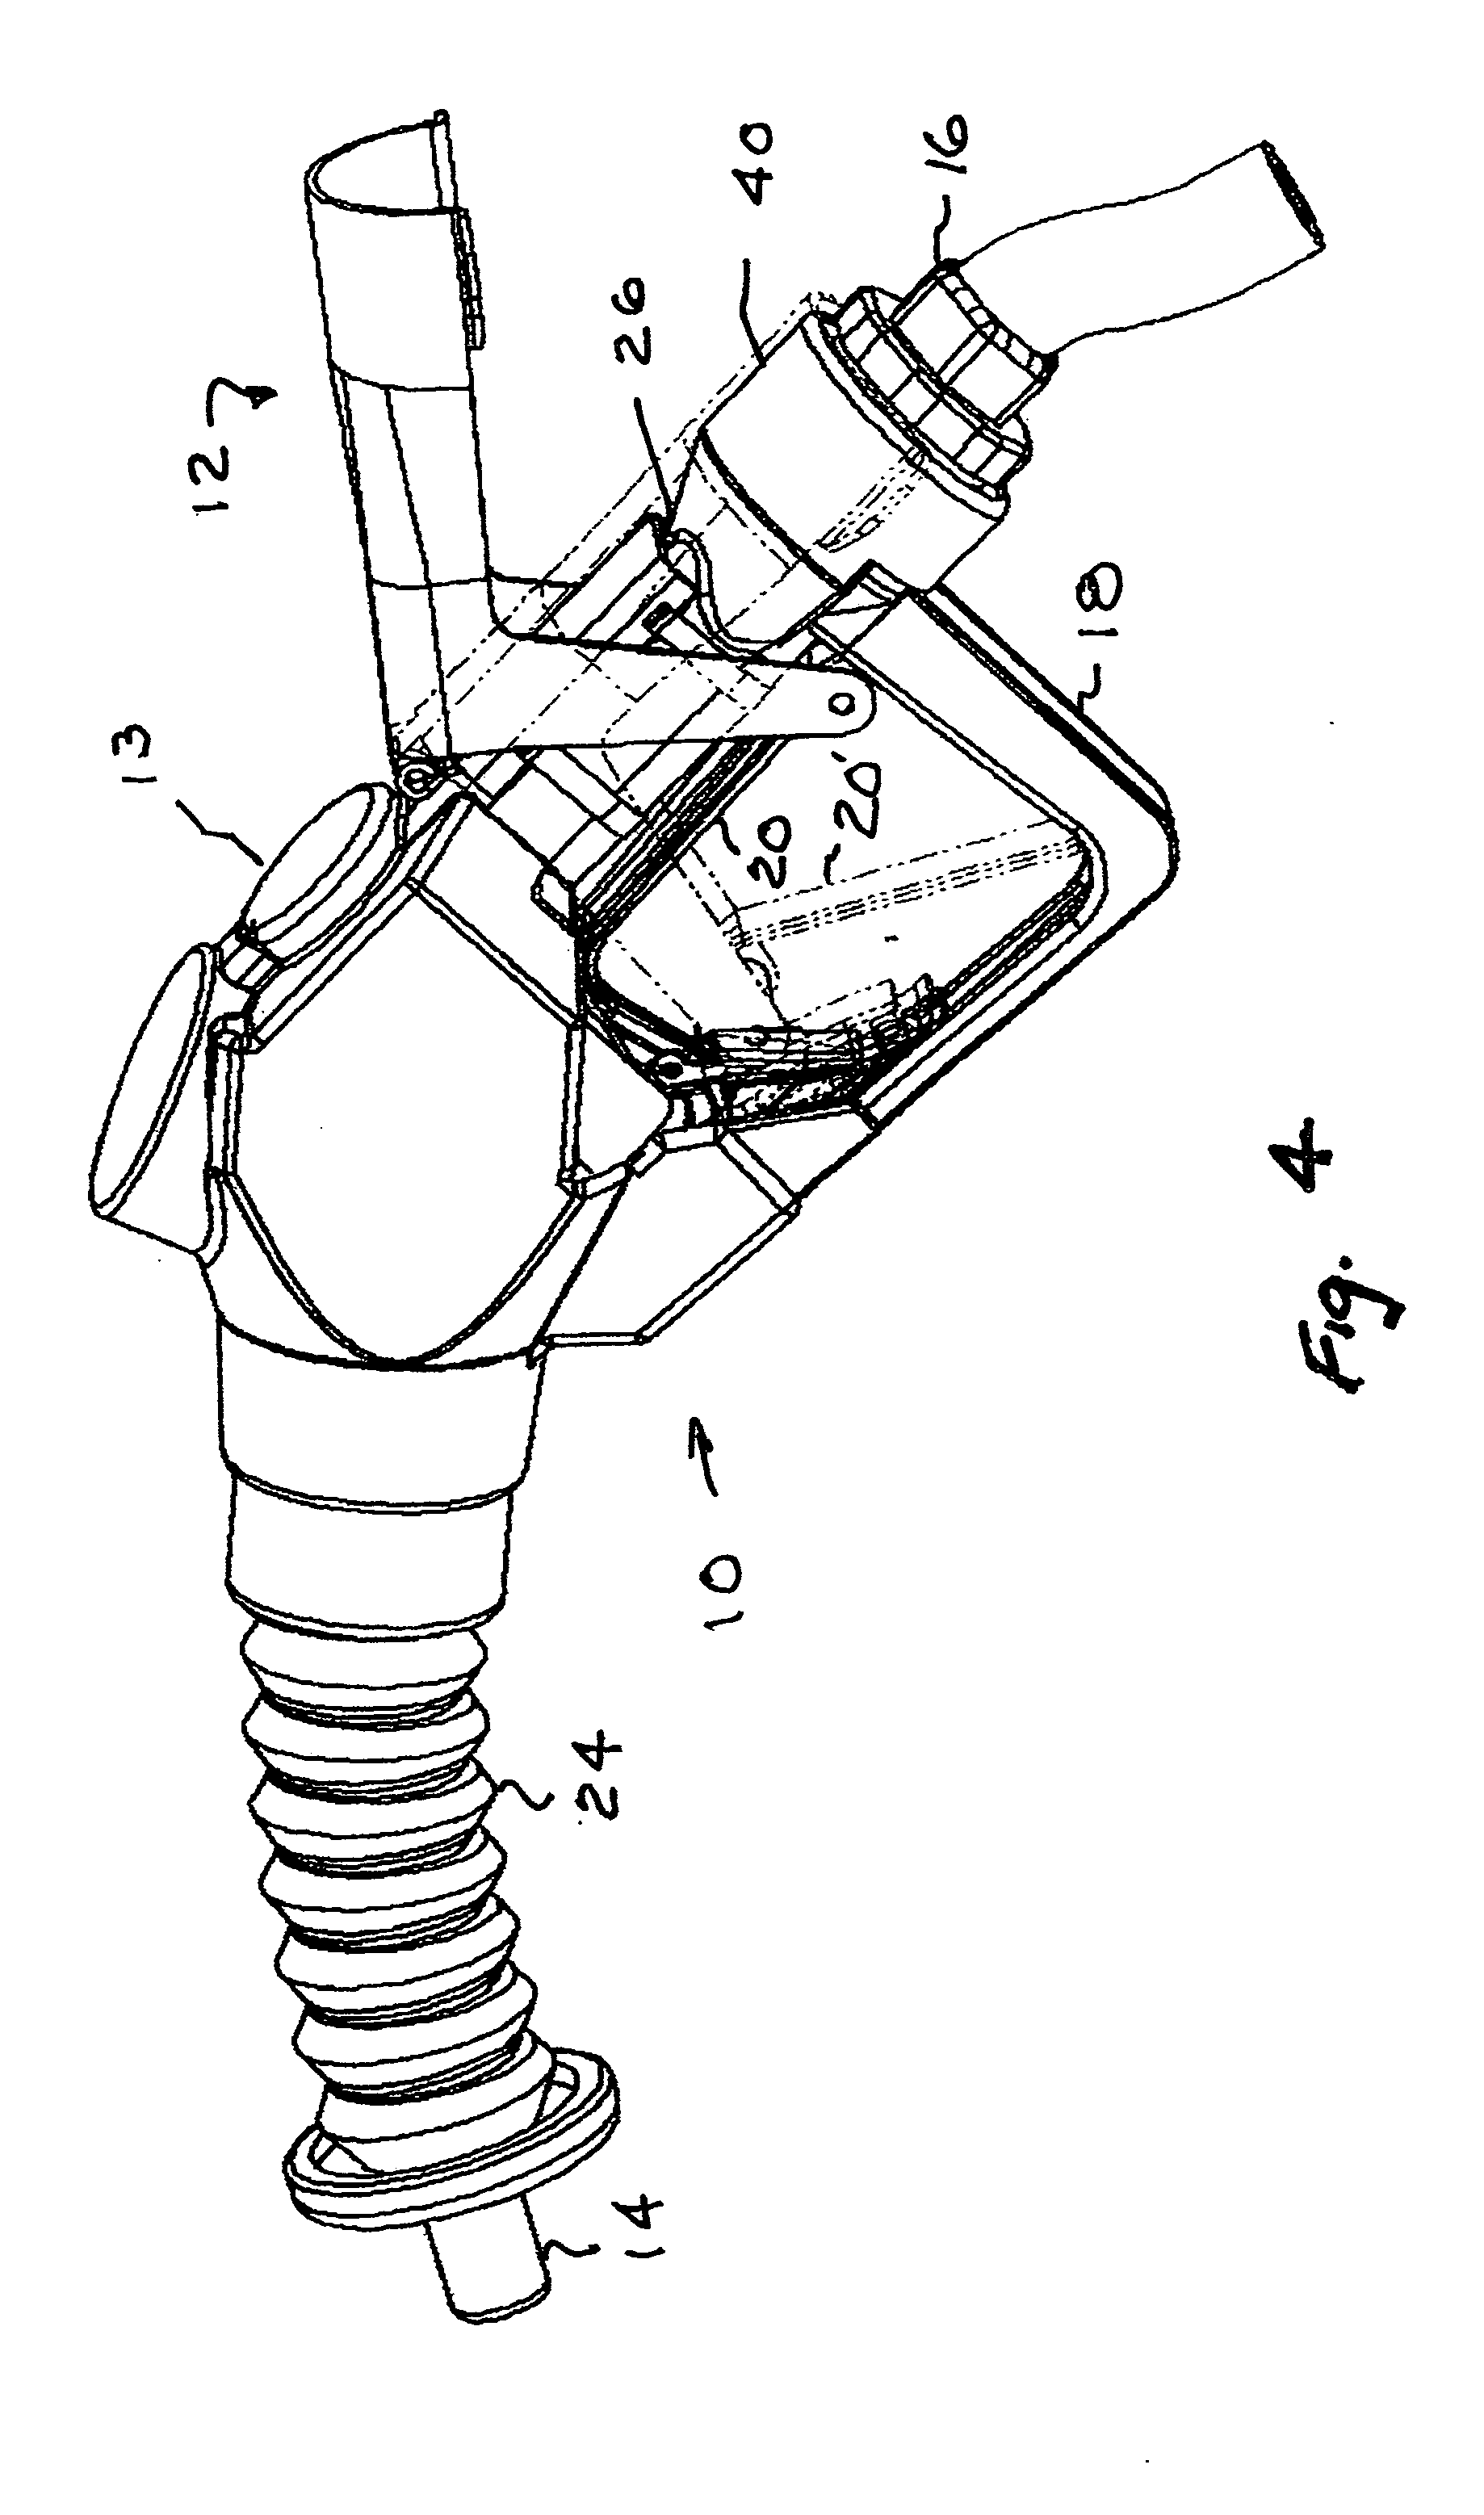 Fluid nozzle and adapter for existing fluid nozzles